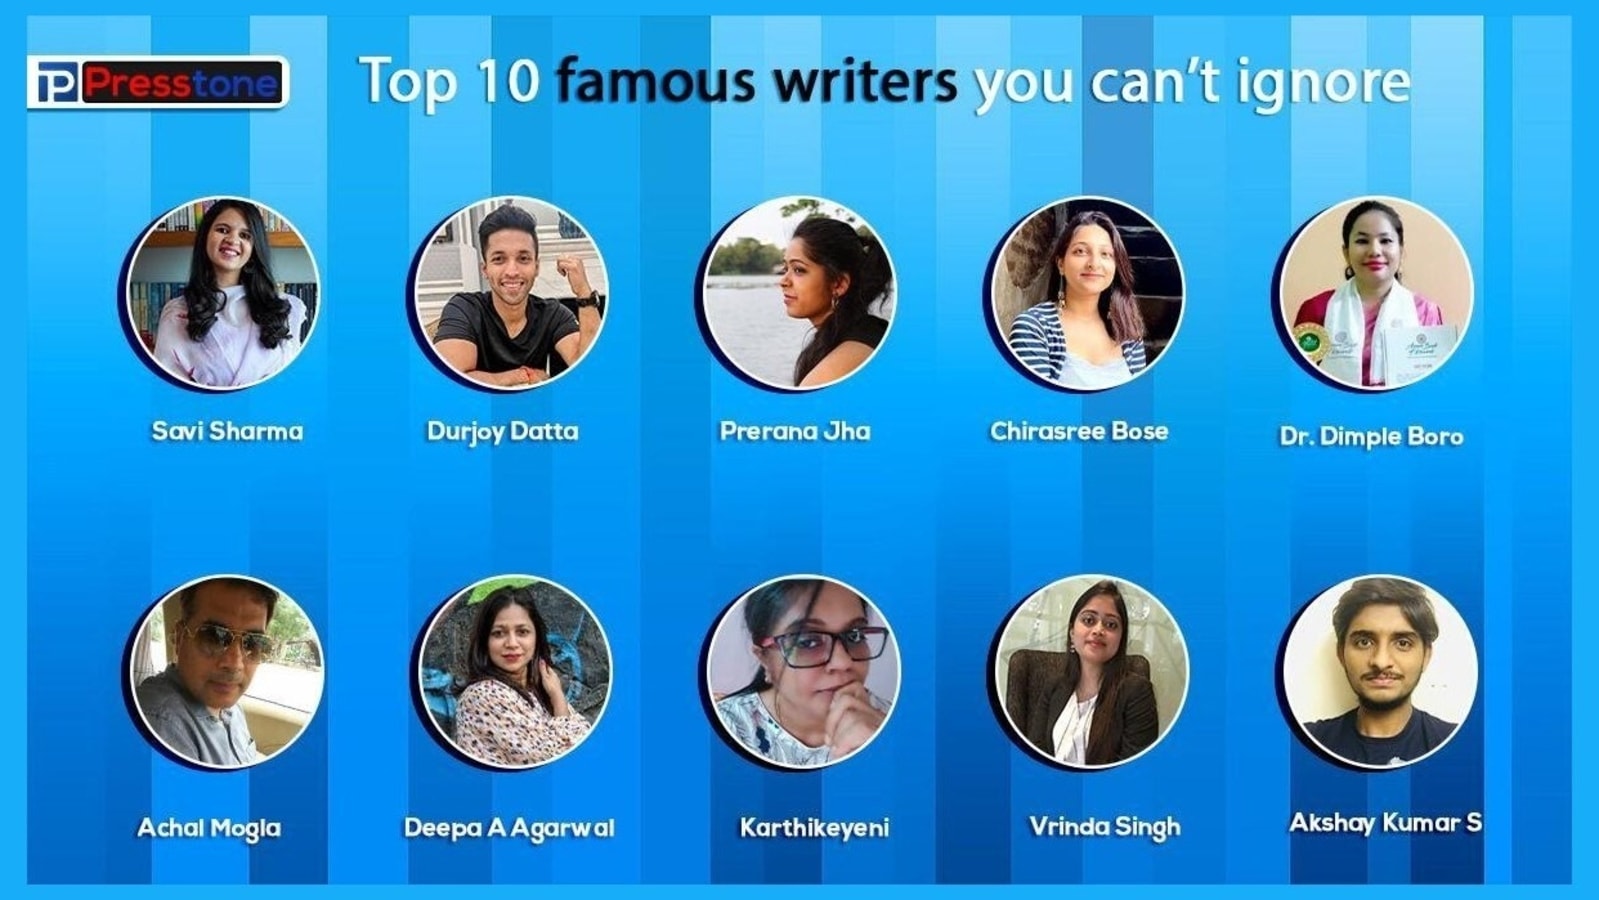 Top 10 famous writers can't ignore - Hindustan Times